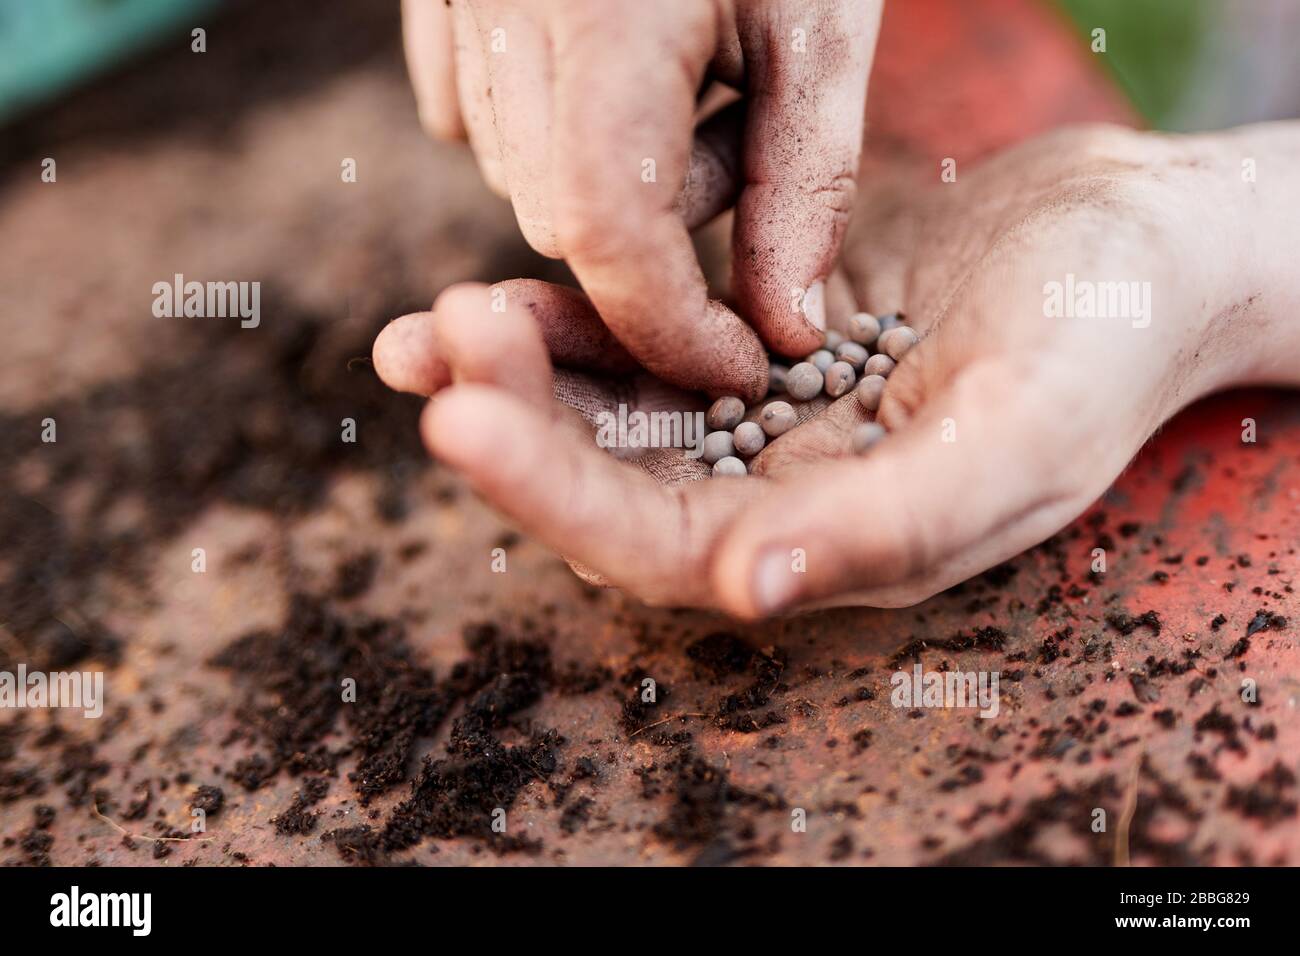 A pair of Primary school aged children hands holding plant seeds Stock Photo